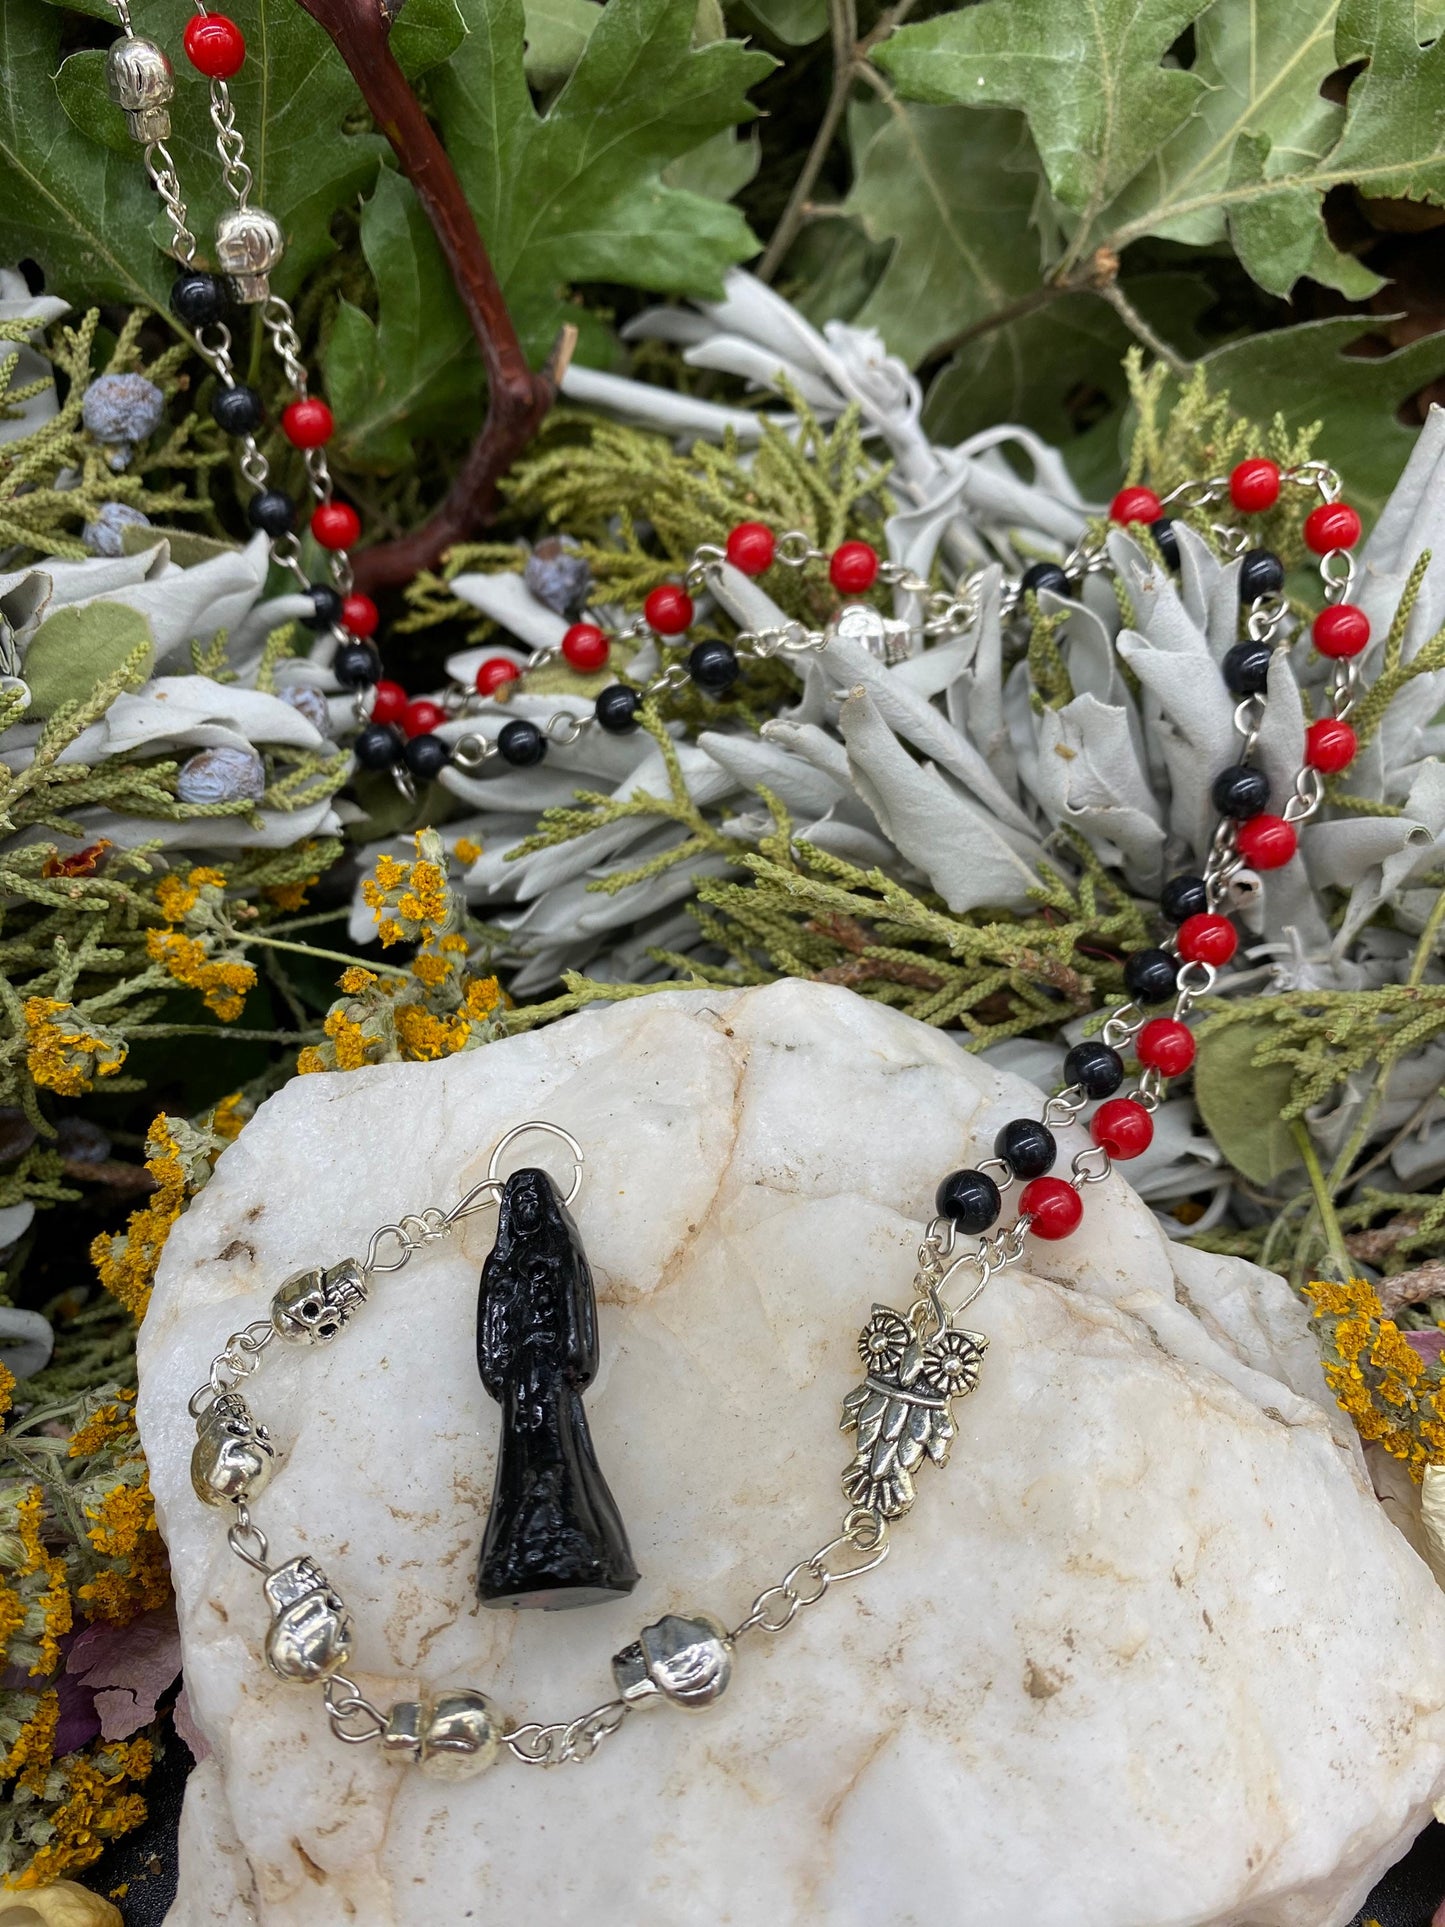 Santa Muerte Negra Reversing Rosary + Sterling Silver Plated Chain + Handcrafted